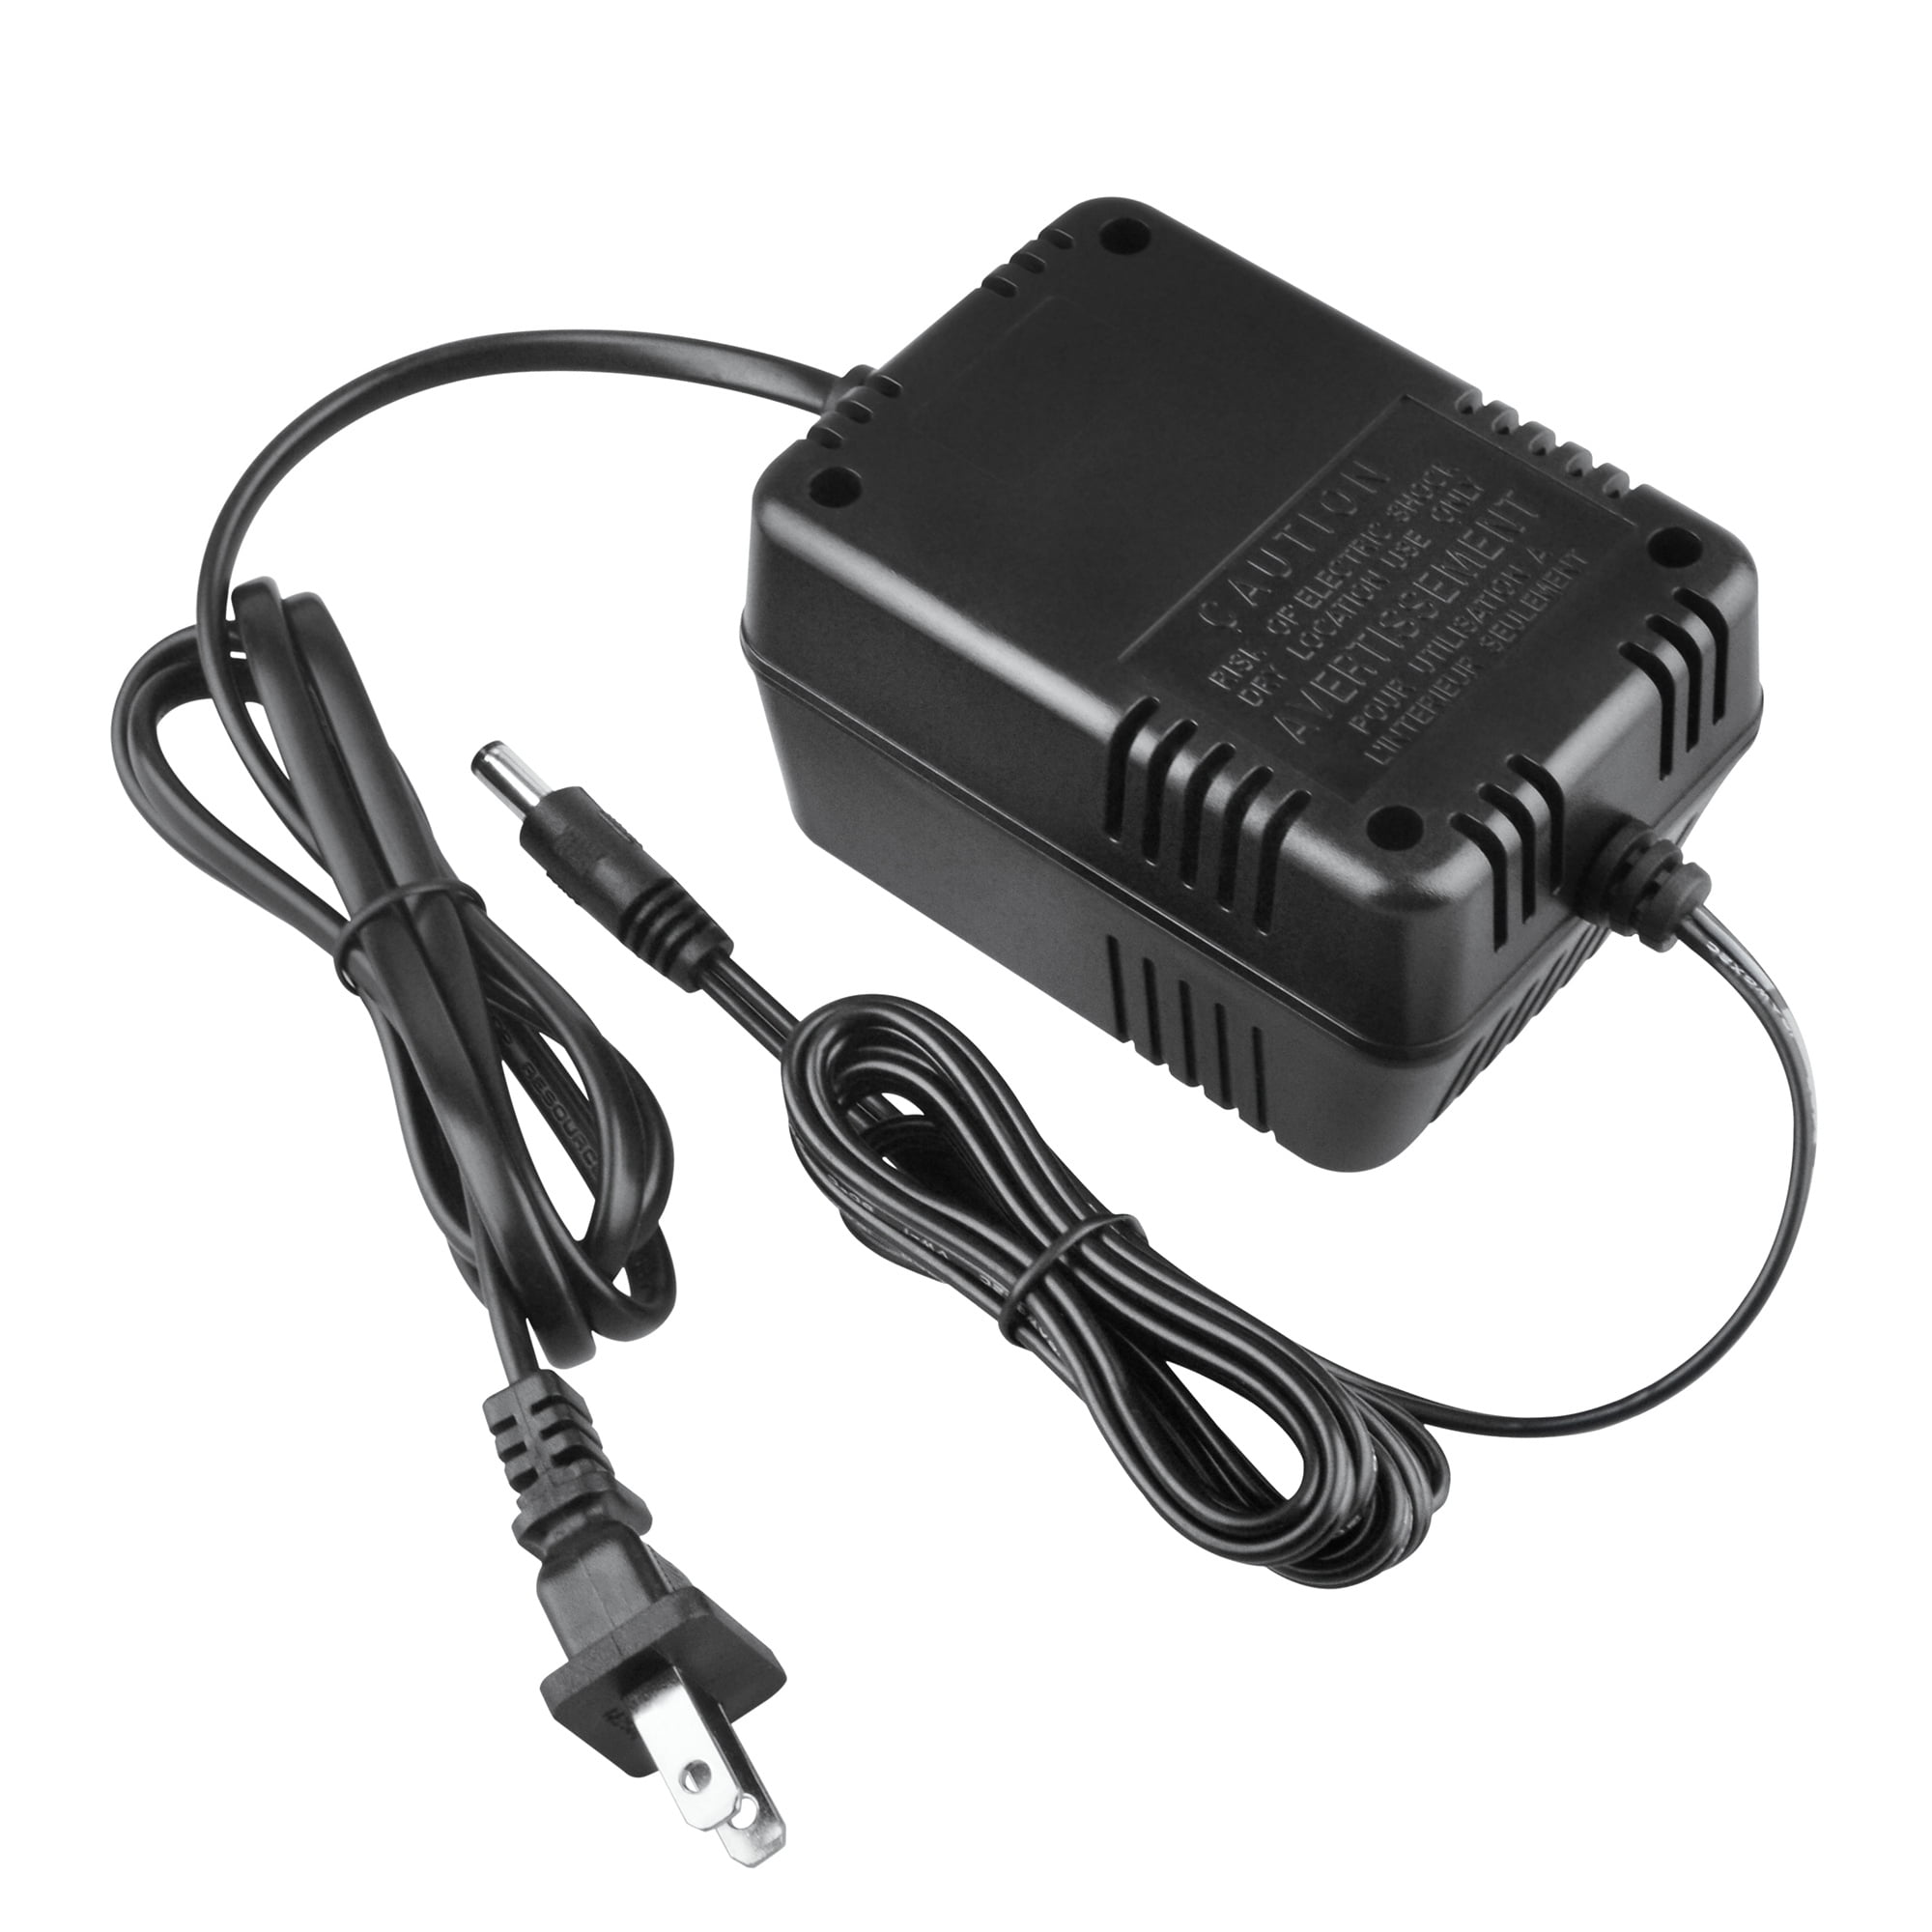 PKPOWER AC Adapter Replacement for Black & Decker 9073 9073OB 2.4V